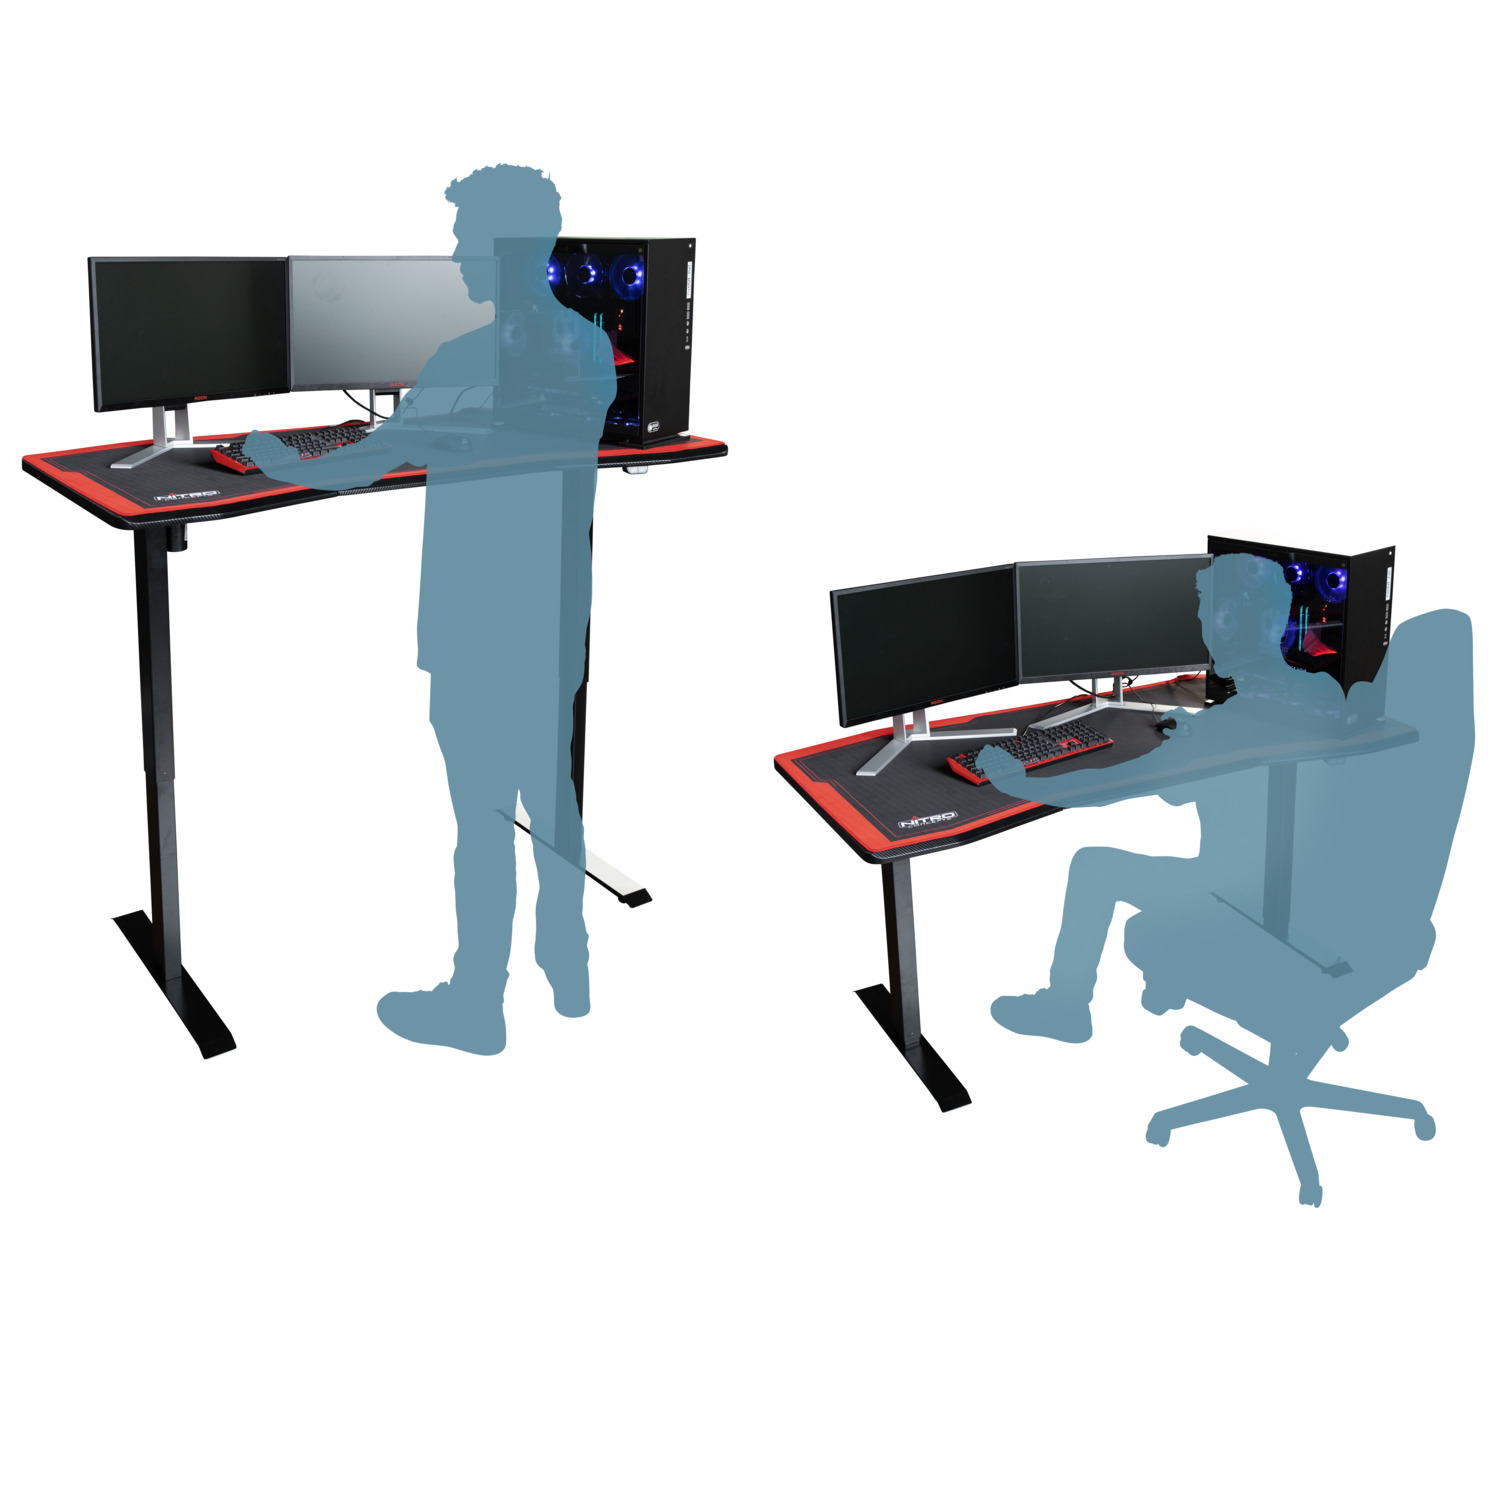 nitro-concepts - Gaming Desk D16E Carbon Red - electrically adjustable height